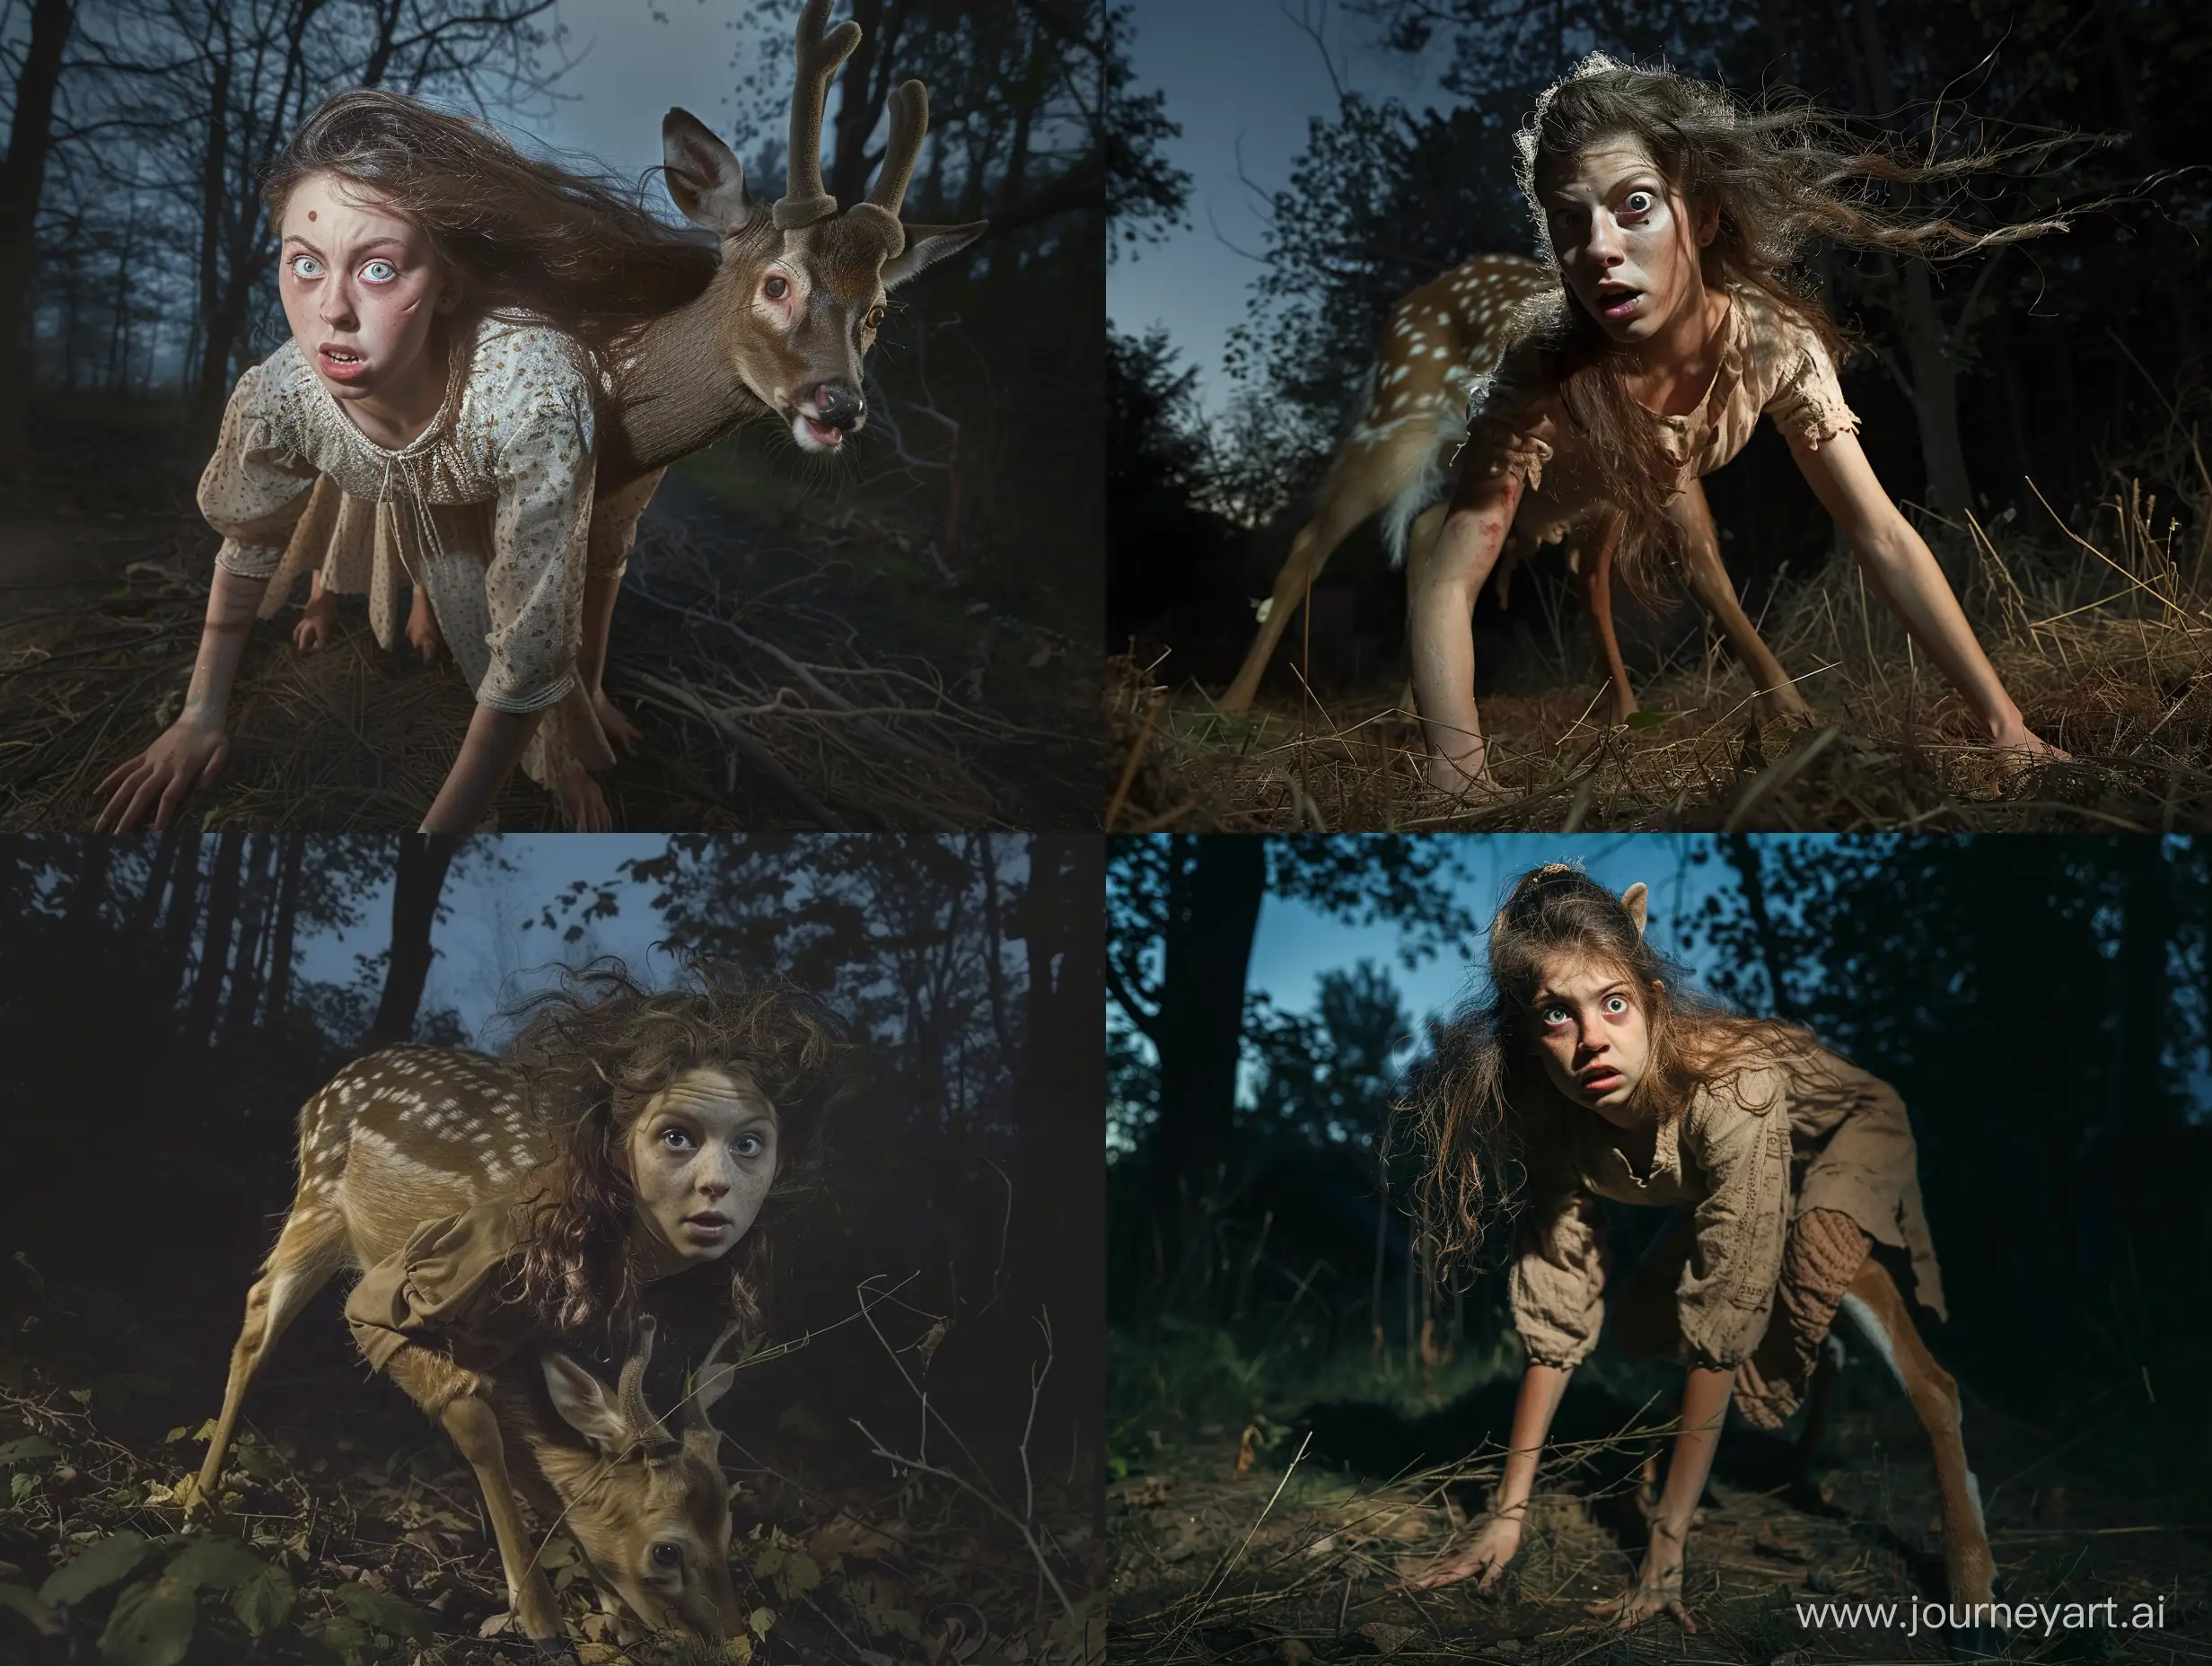 Transformation-of-a-Medieval-Princess-into-a-Deer-in-Enchanted-Forest